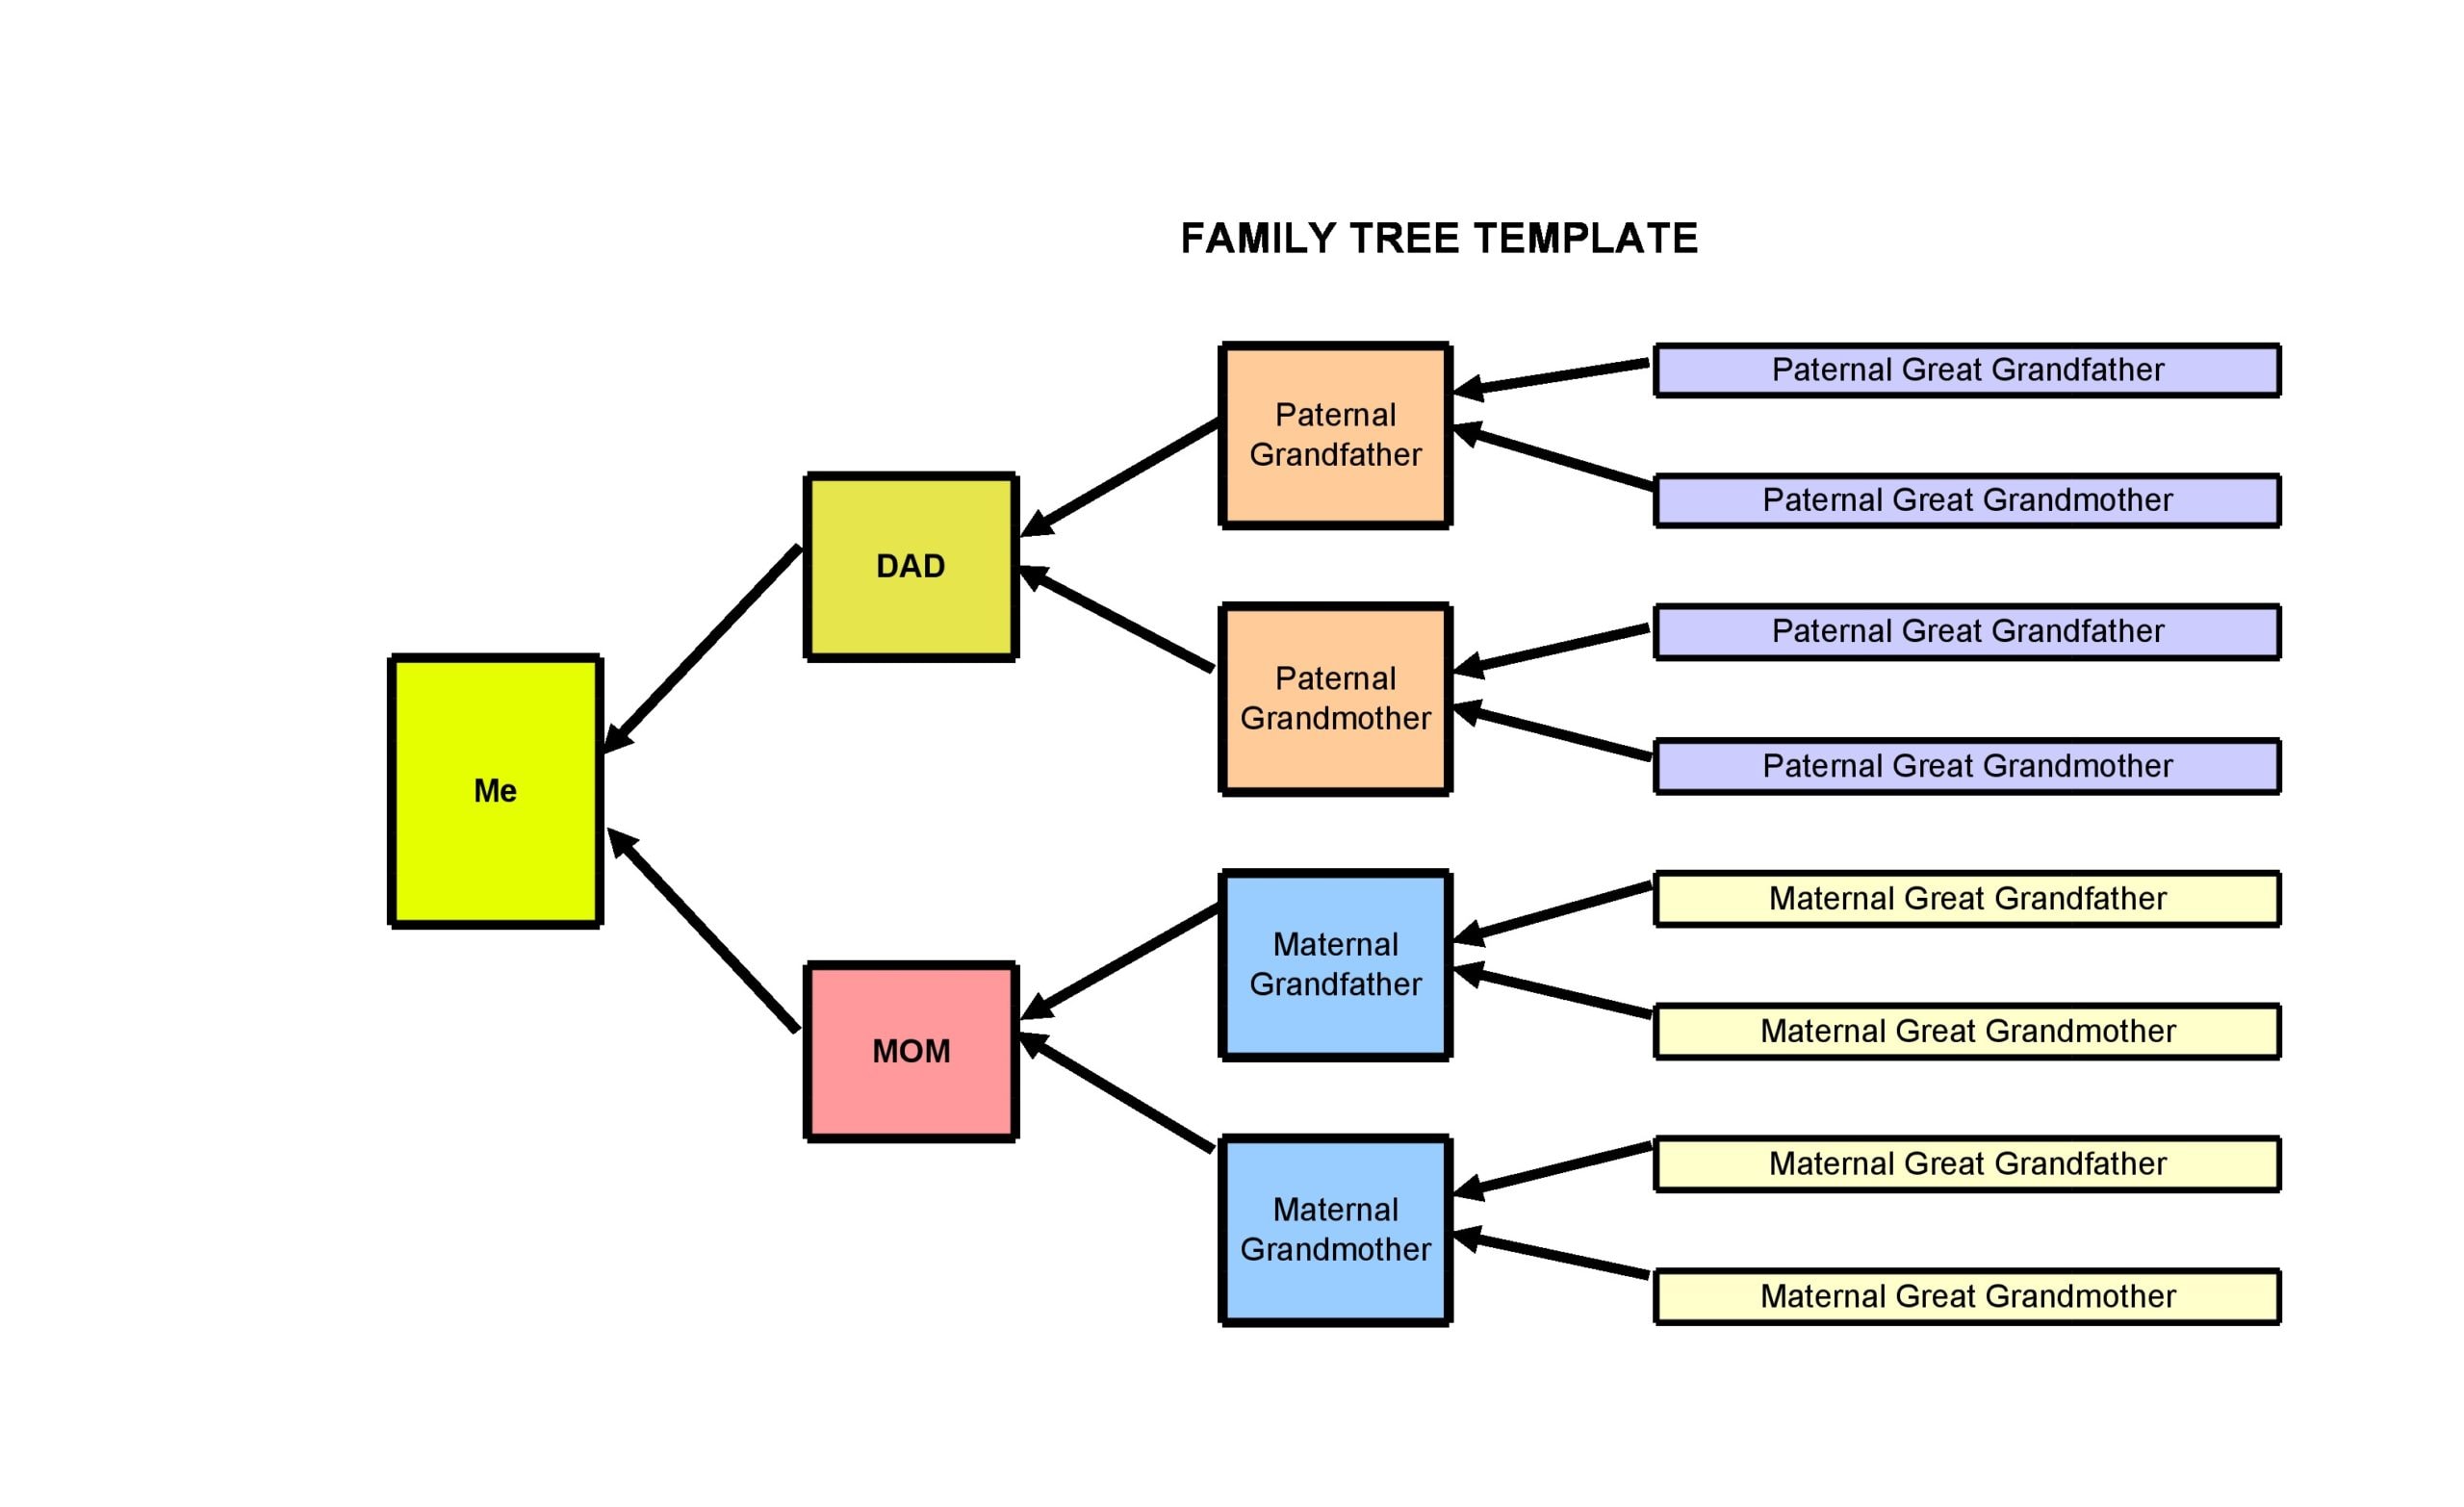 24 Editable Family Tree Templates [24% Free] - TemplateArchive With Regard To Blank Tree Diagram Template